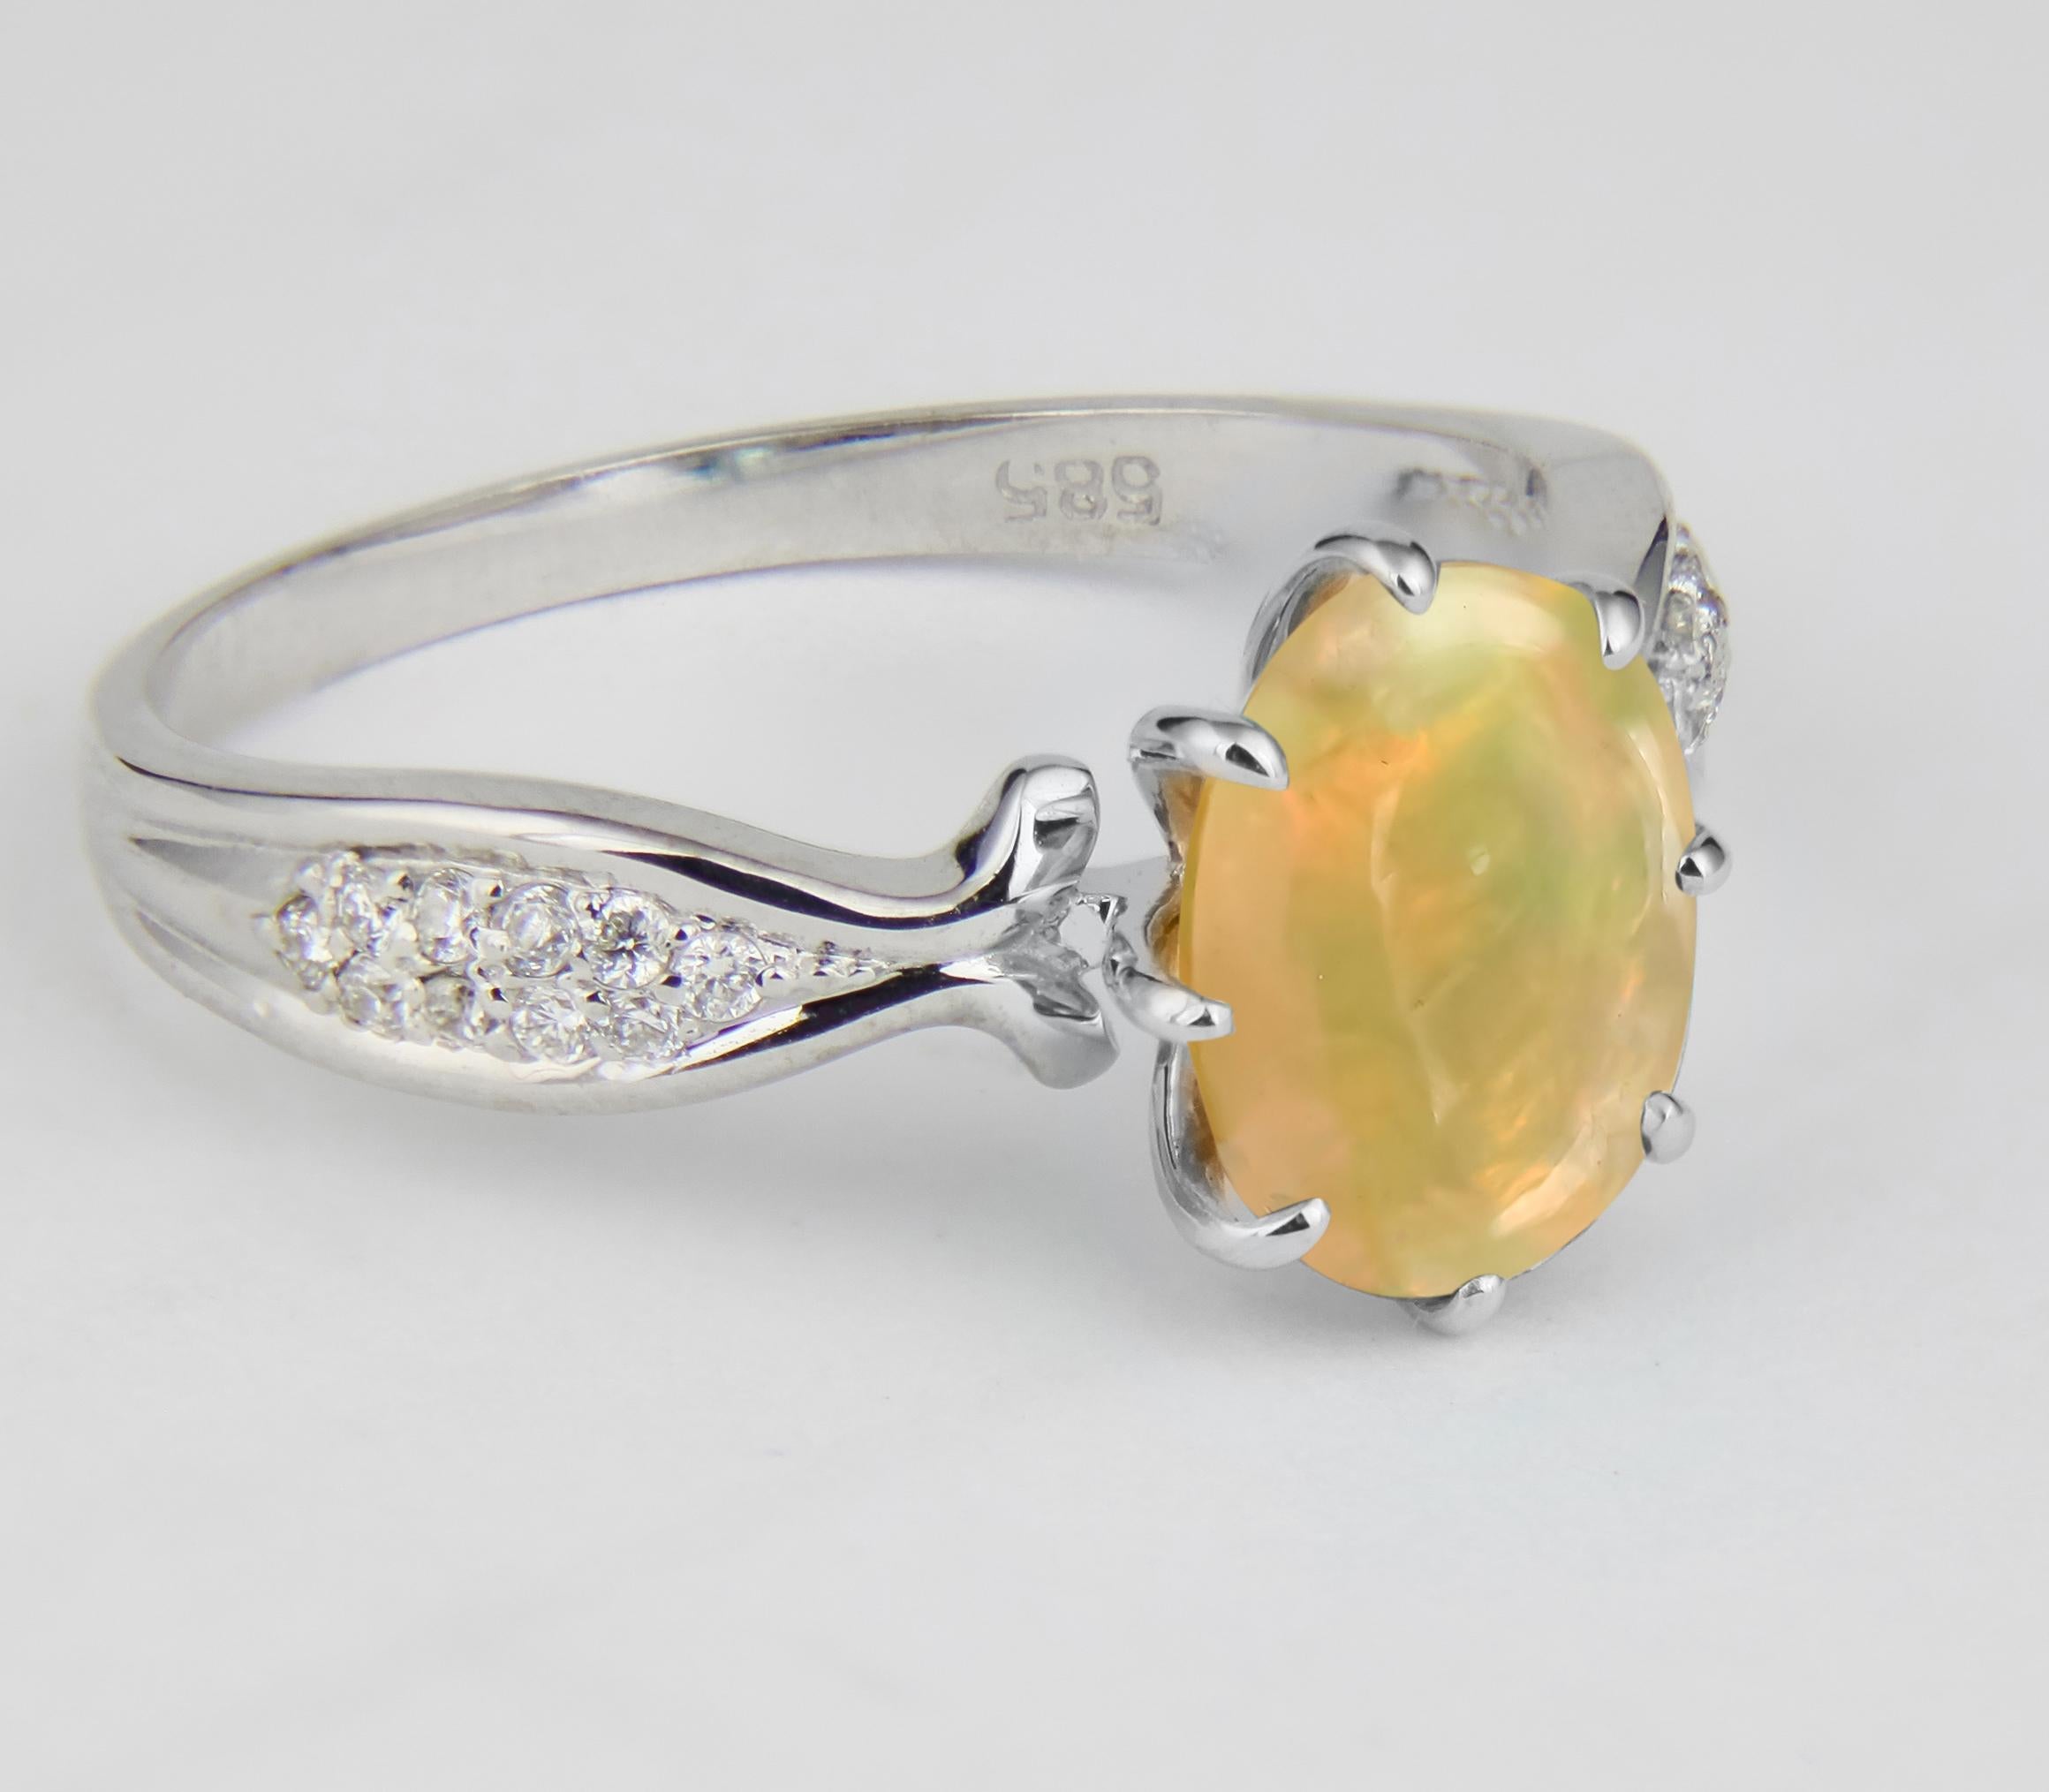 For Sale:  Opal 14k Gold Ring, Cabochon Opal Ring, Opal Gold Ring 5